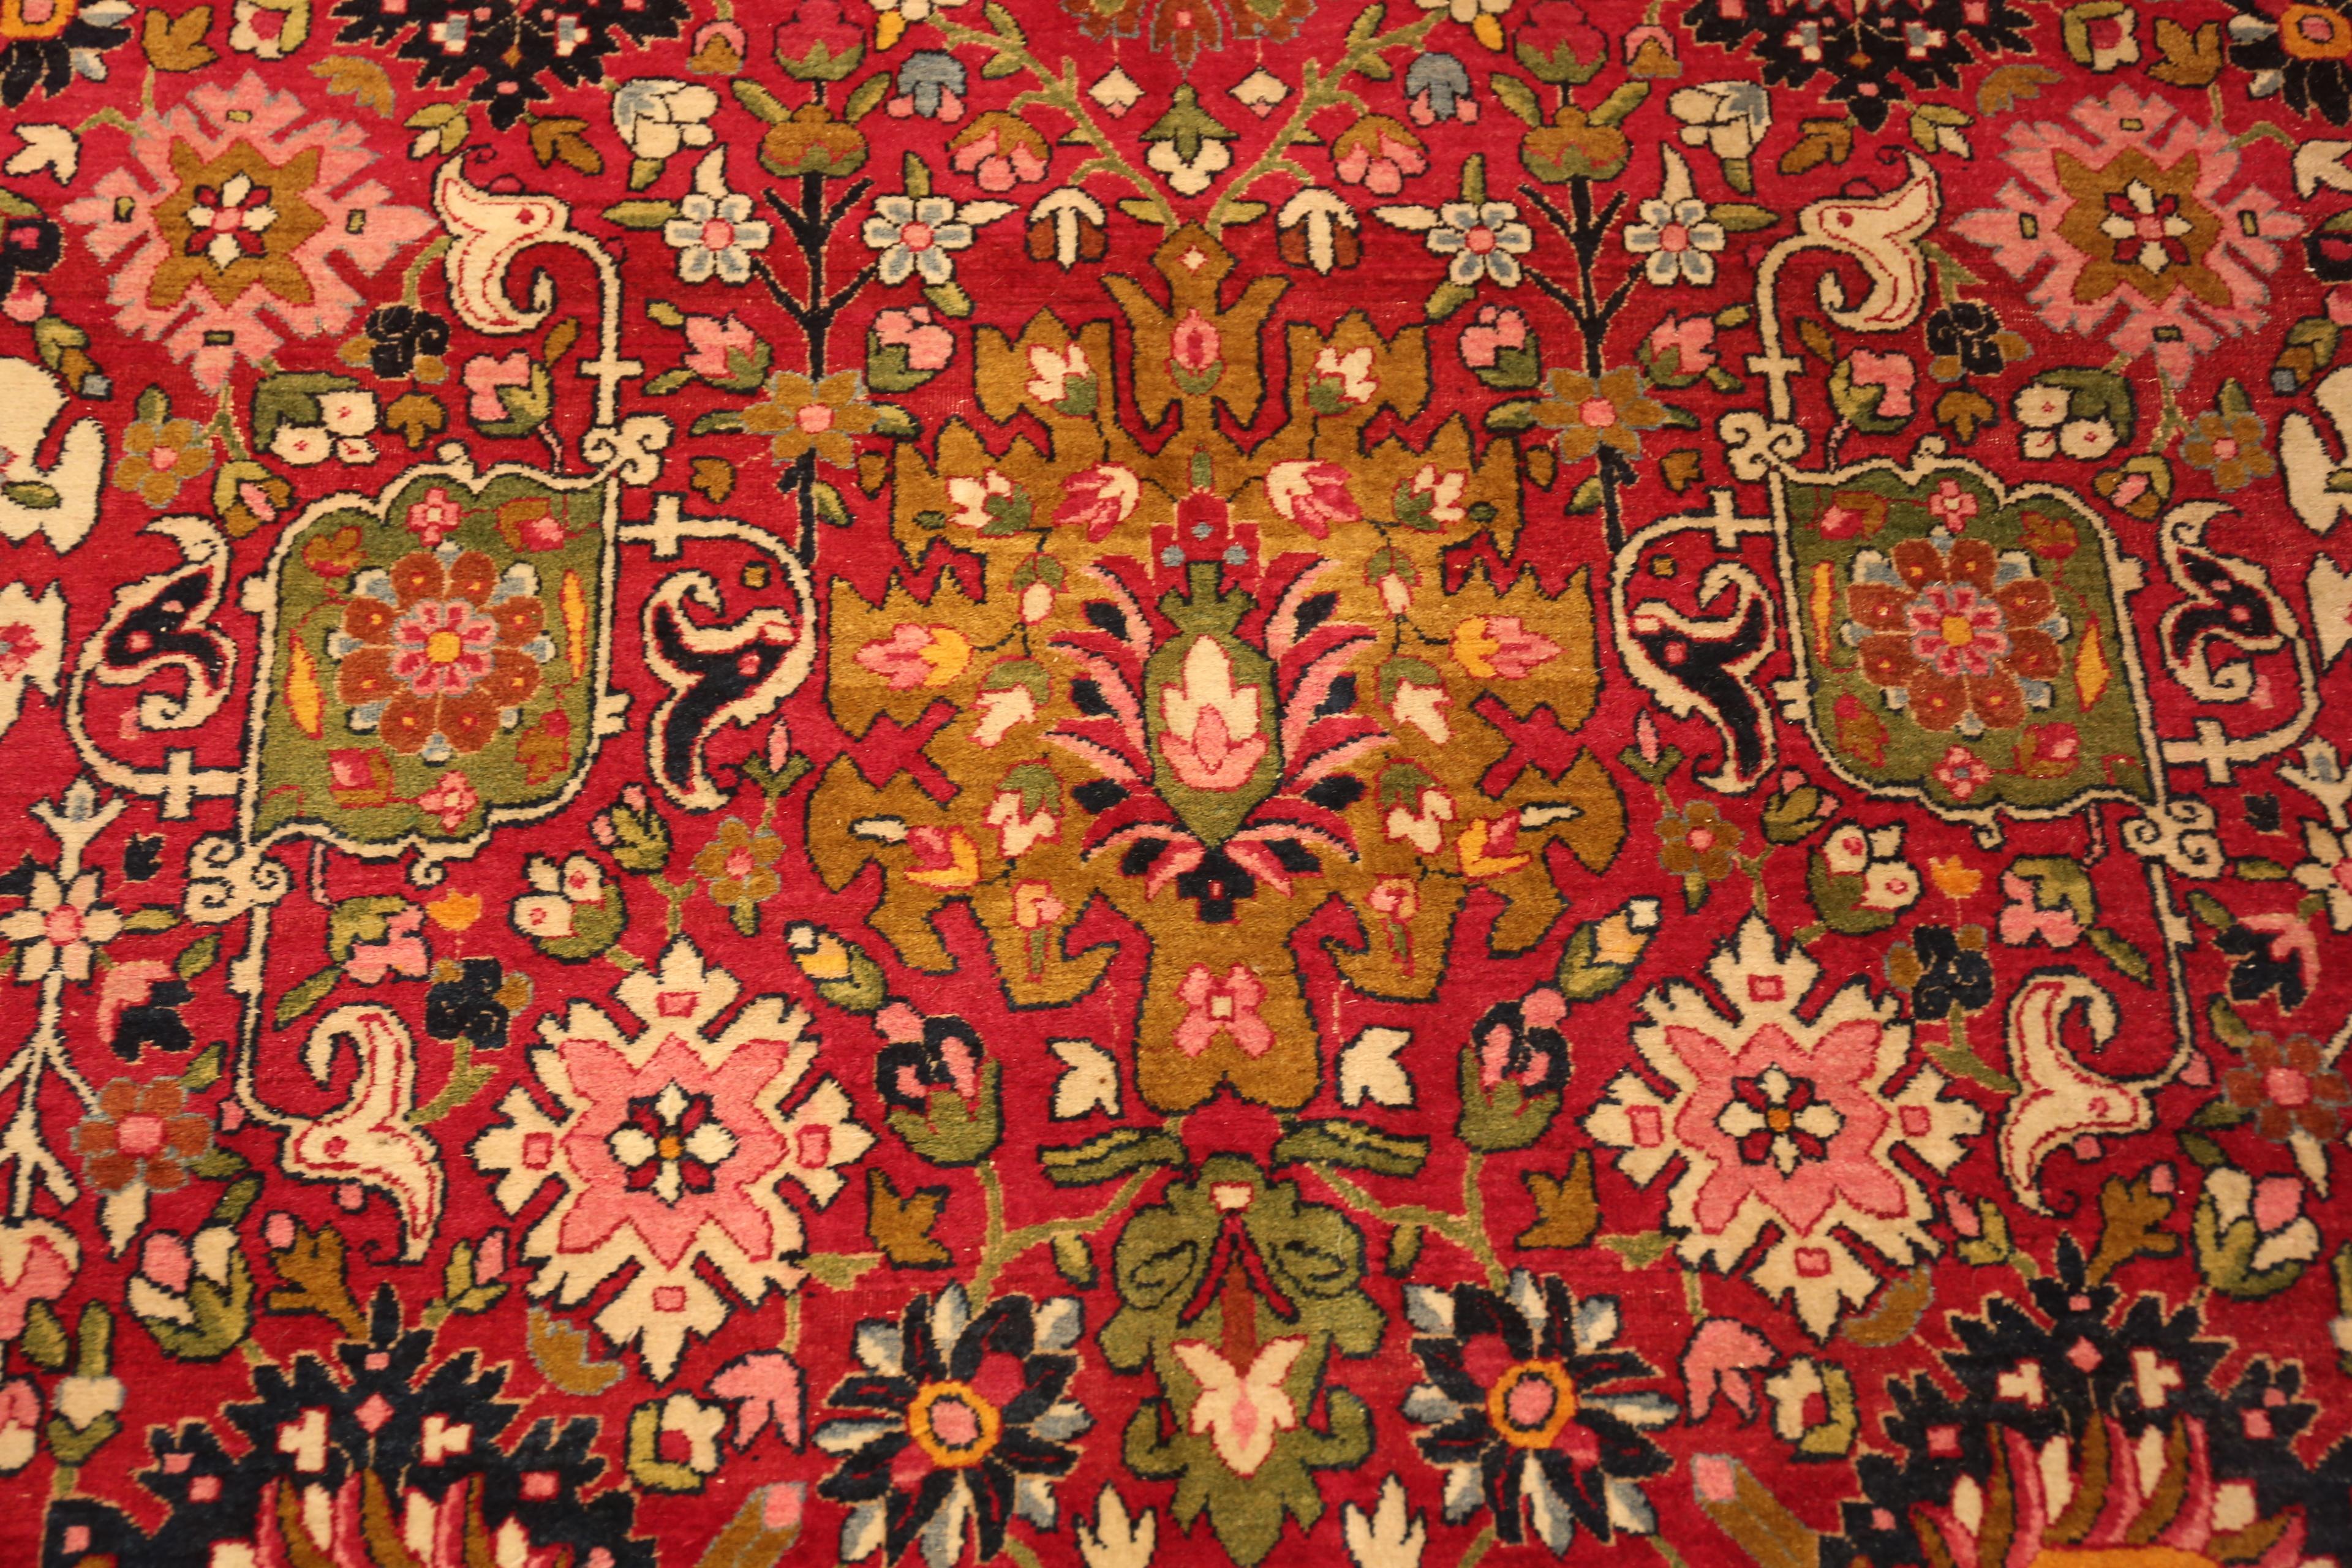 Hand-Knotted Antique Persian Kerman Rug. Size: 11 ft 10 in x 20 ft For Sale